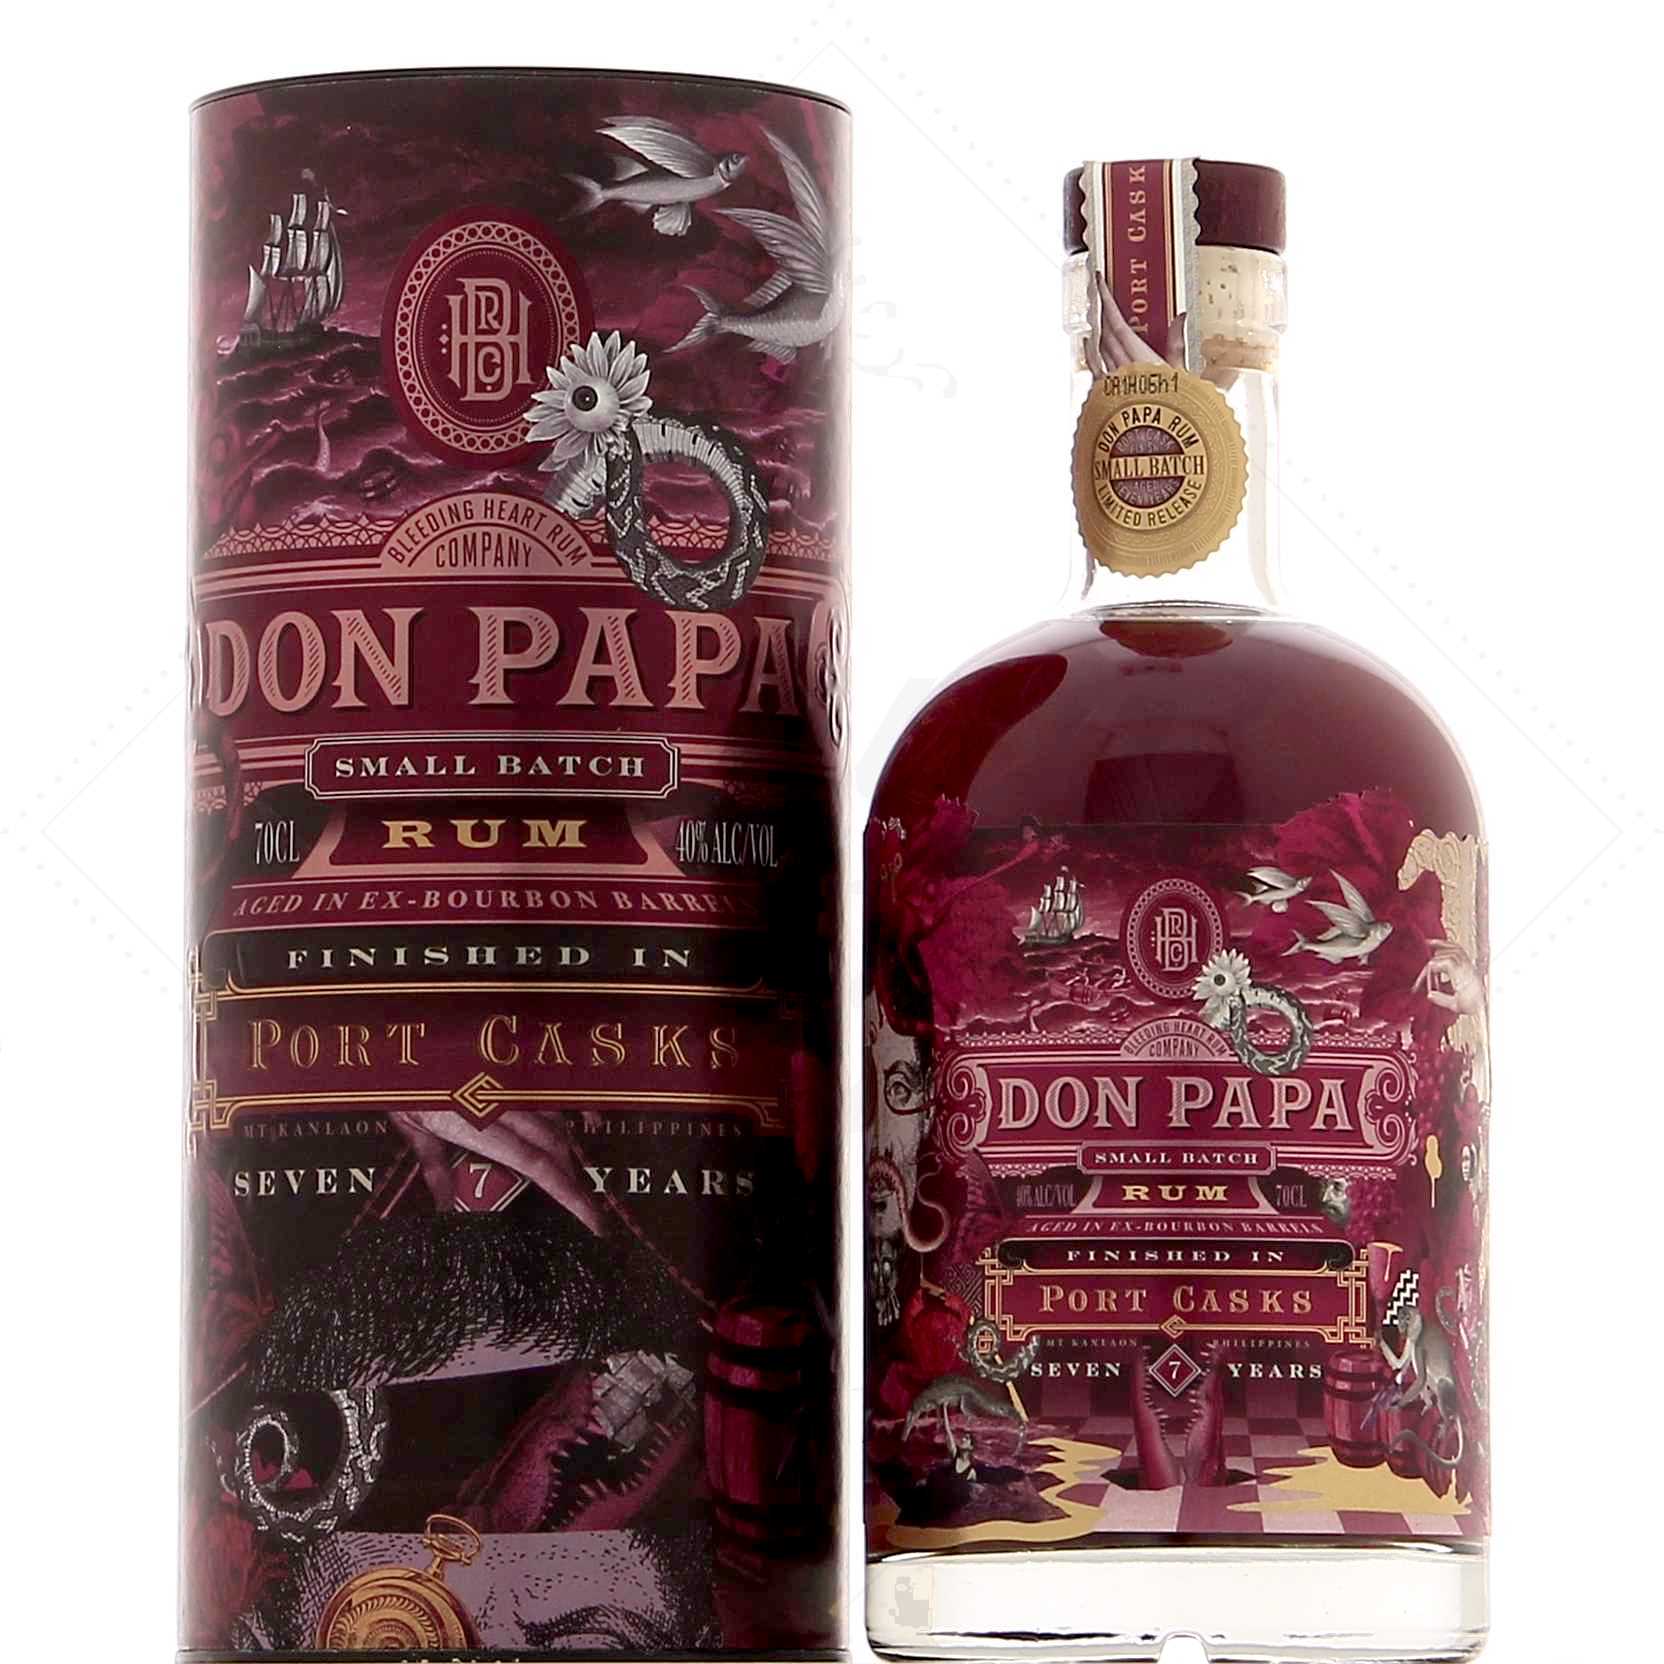 10 Things You Should Know About Don Papa Rum